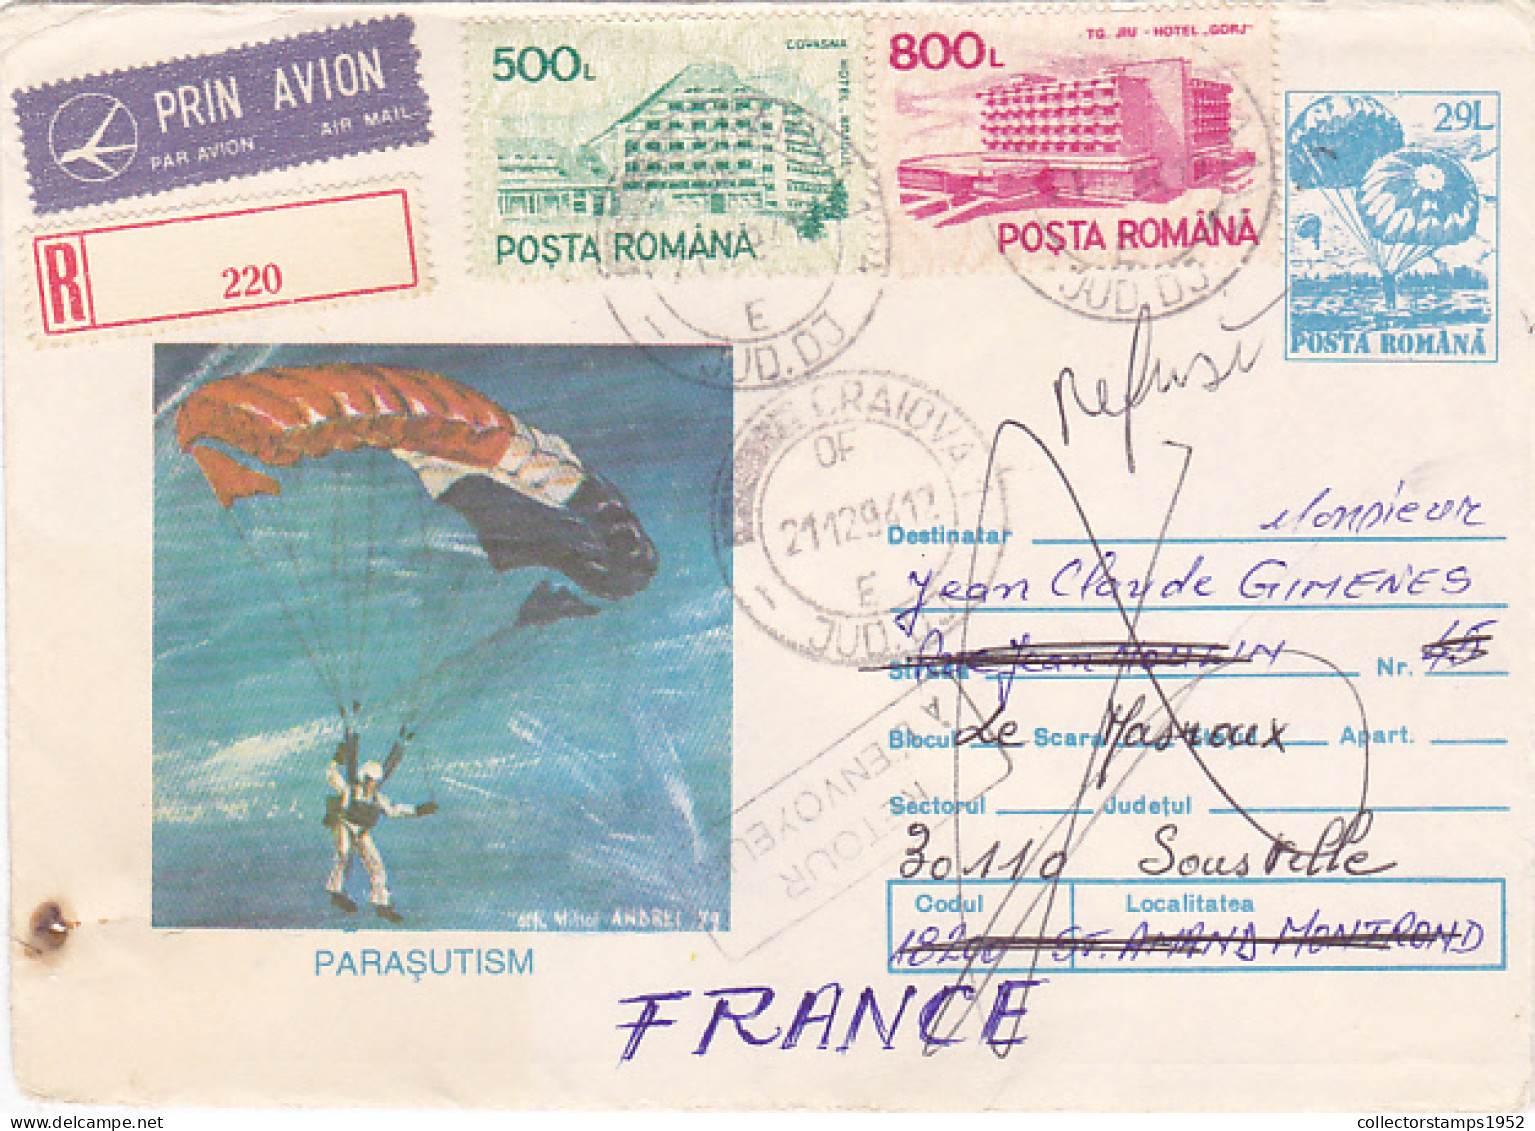 PARACHUTTING, SPORTS, REGISTERED COVER STATIONERY, 1993, ROMANIA - Parachutting